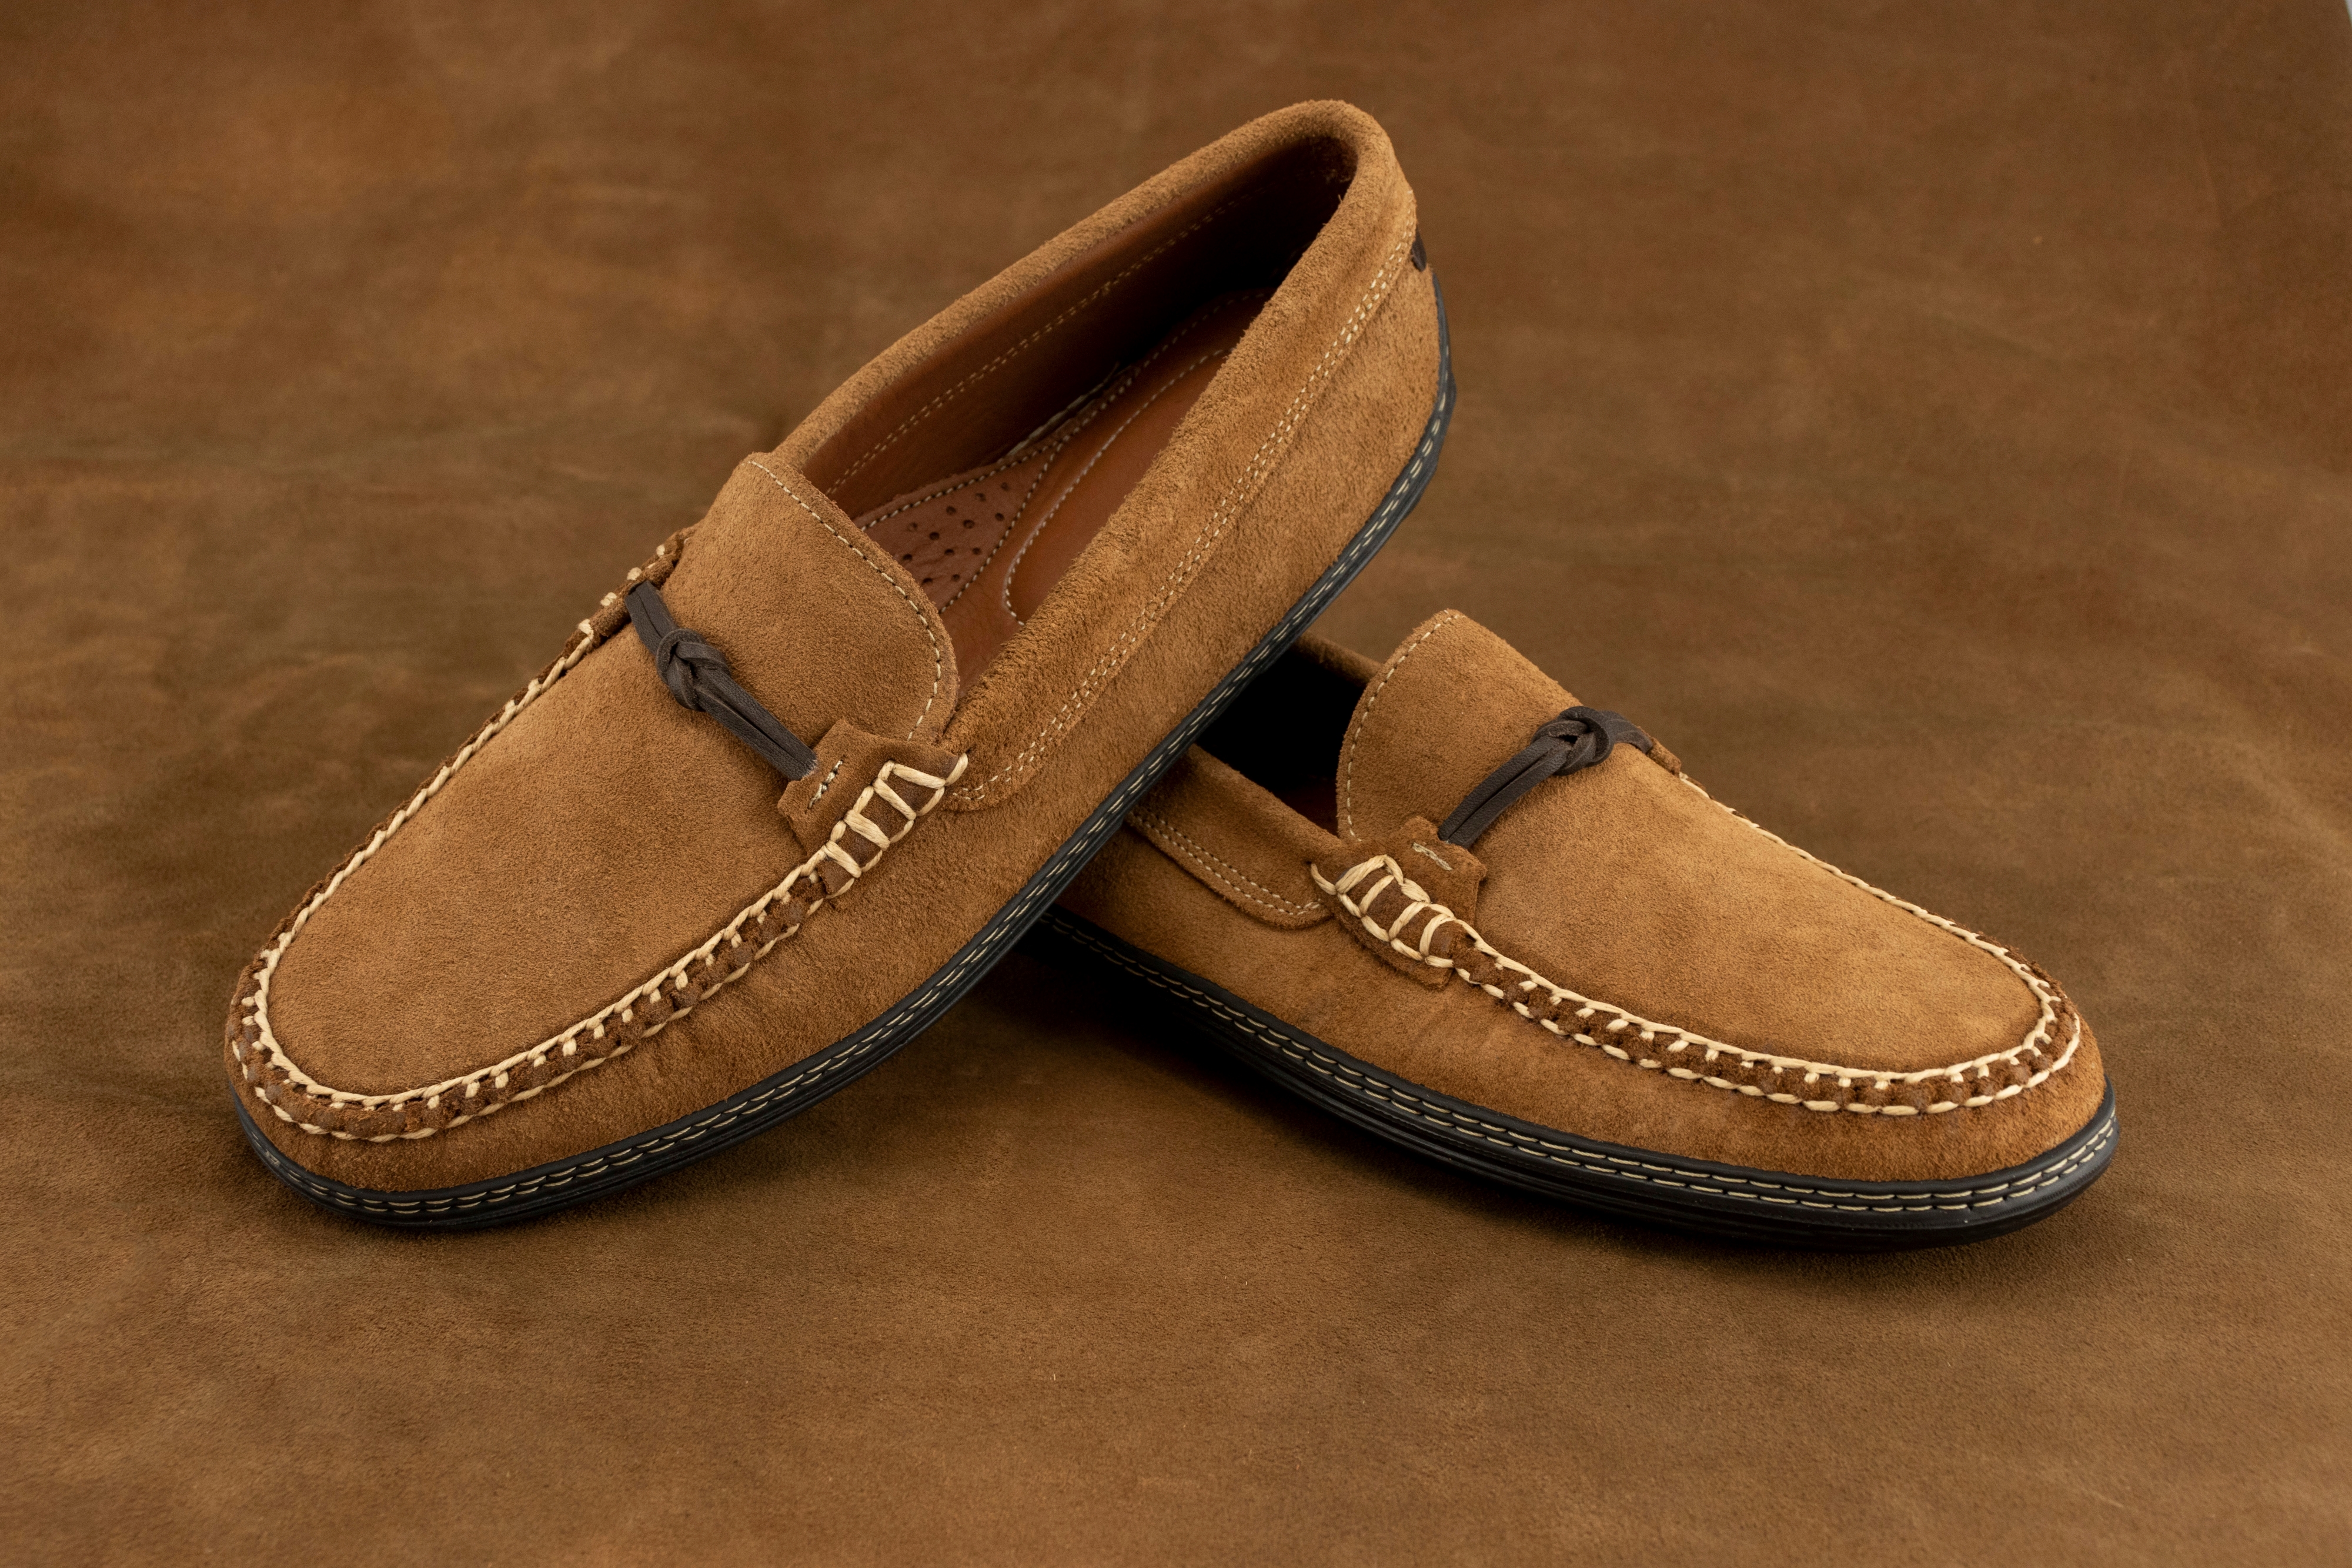 Louis Cuppers - Complete the business casual look with this pair